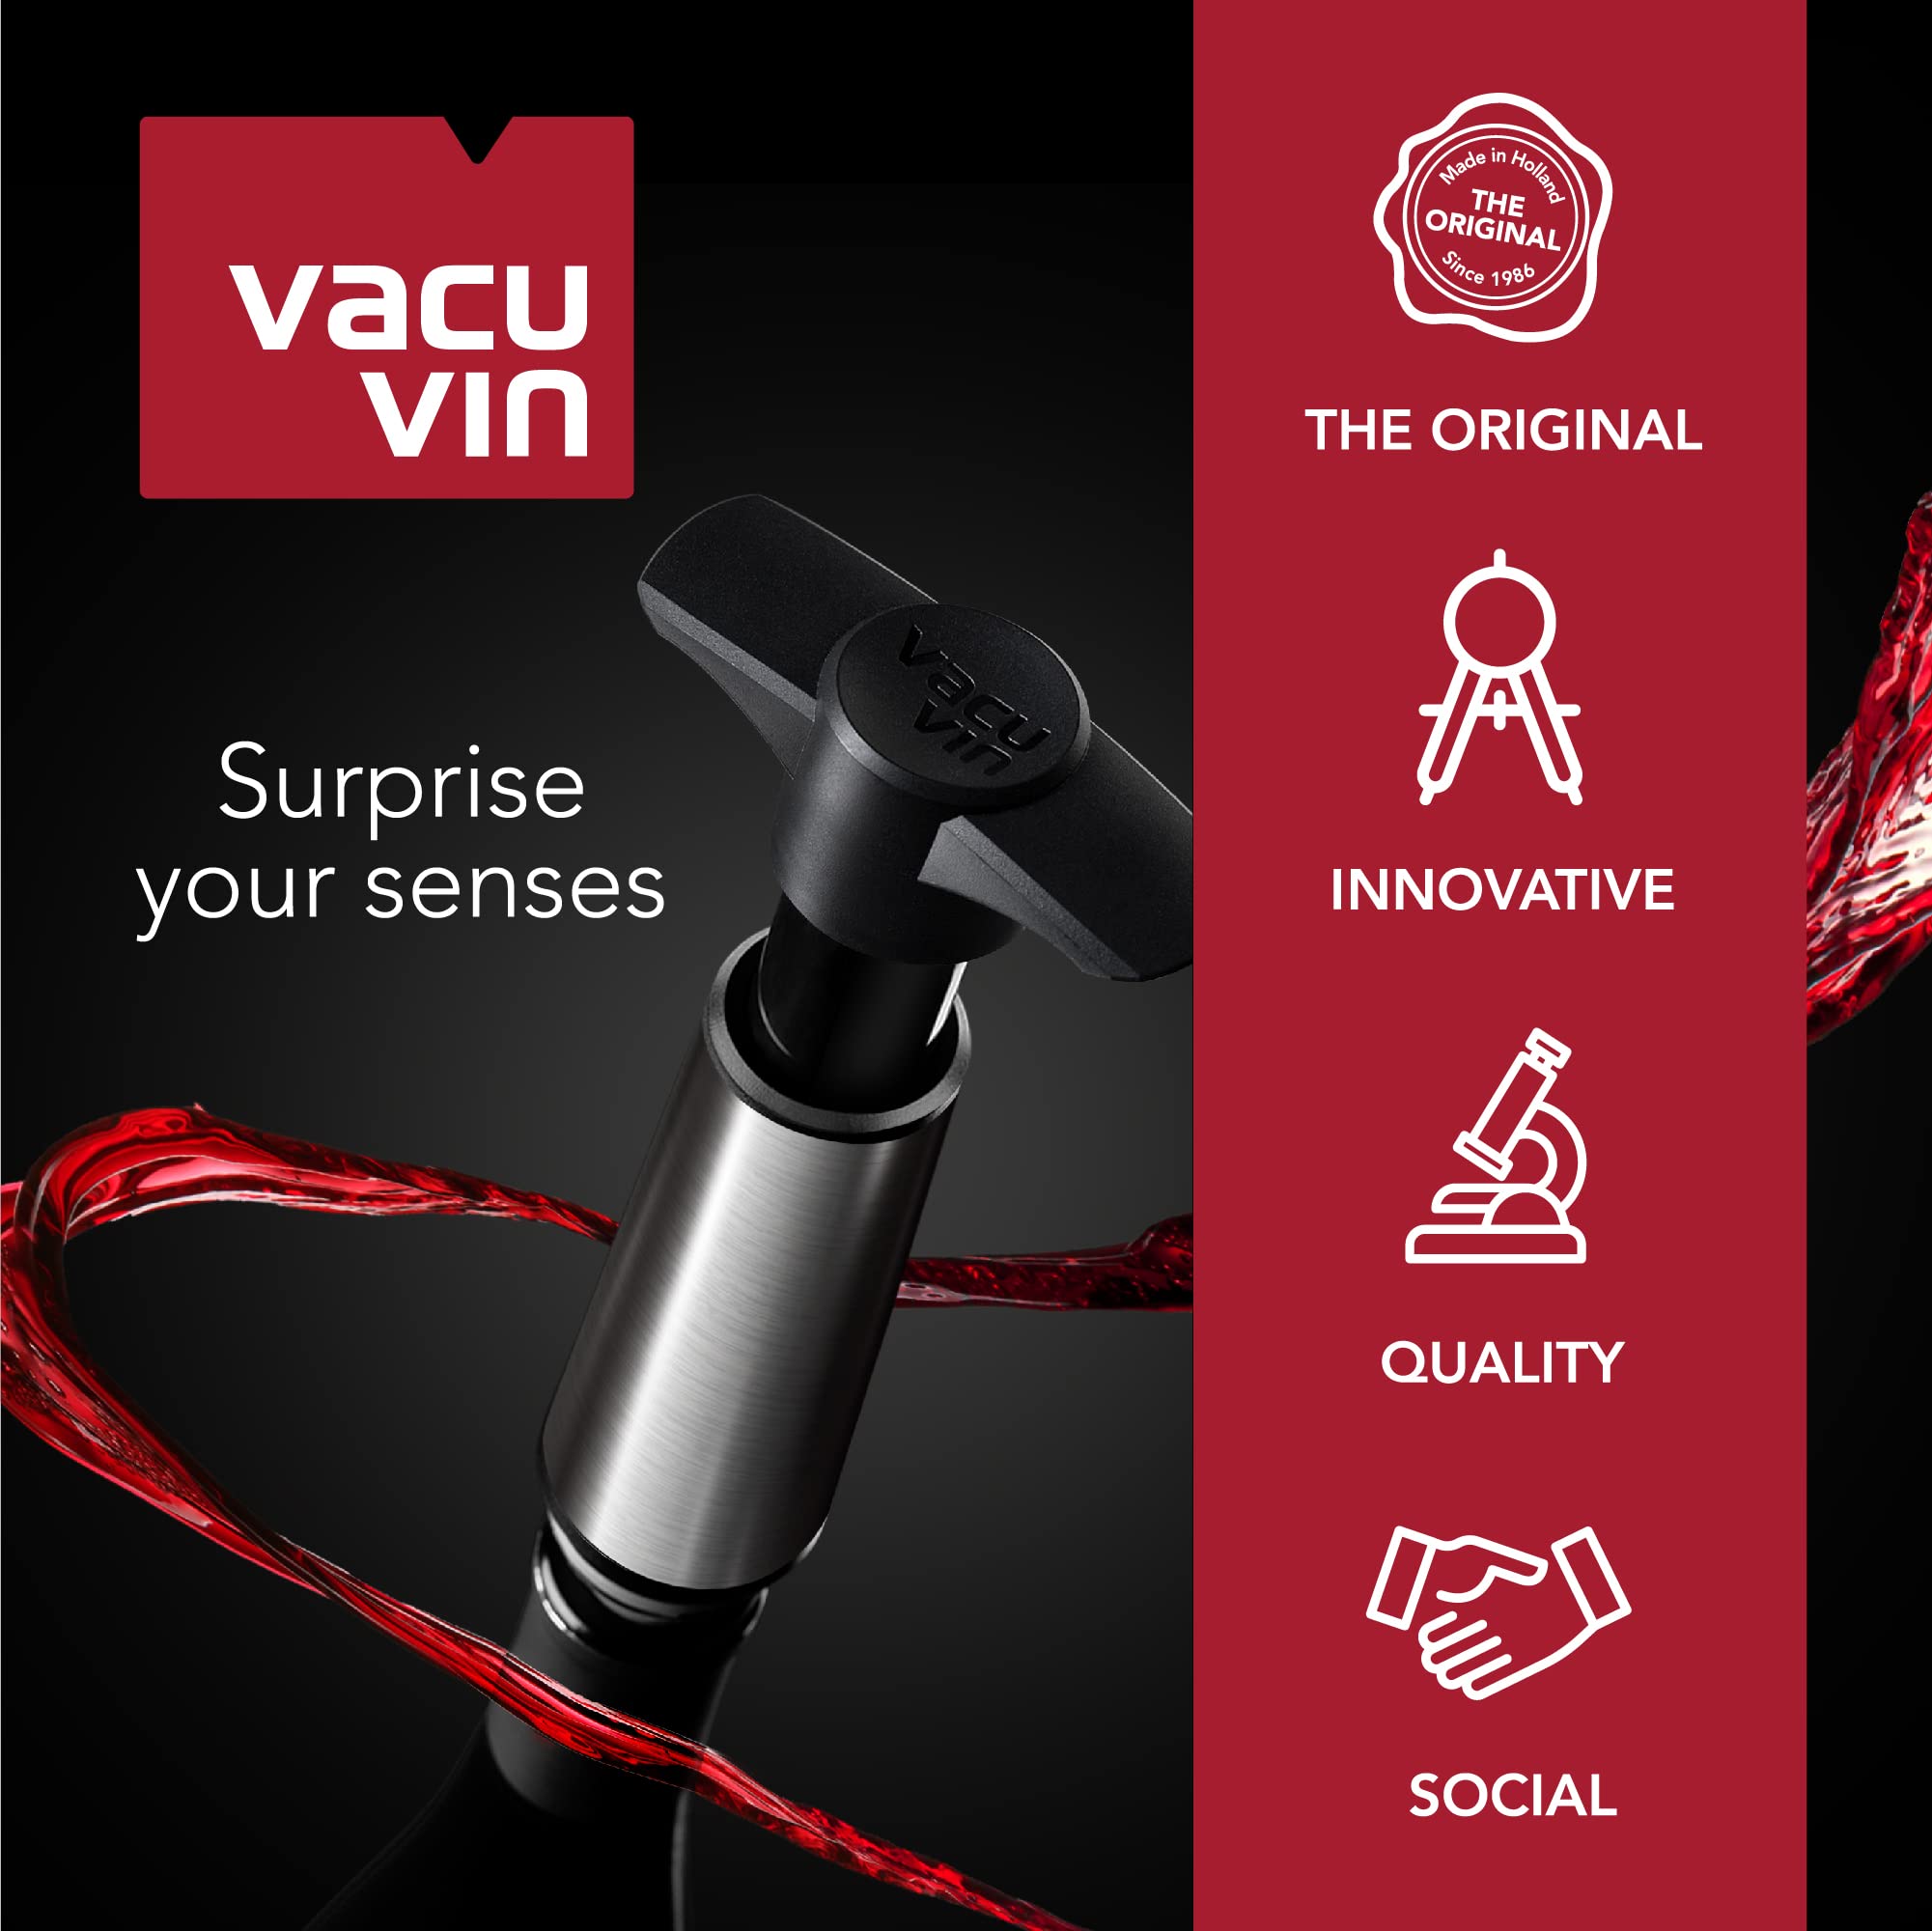 Vacu Vin Wine Saver Pump Black with Vacuum Wine Stopper - Keep Your Wine Fresh for up to 10 Days - 1 Pump 2 Stoppers - Reusable - Made in the Netherlands